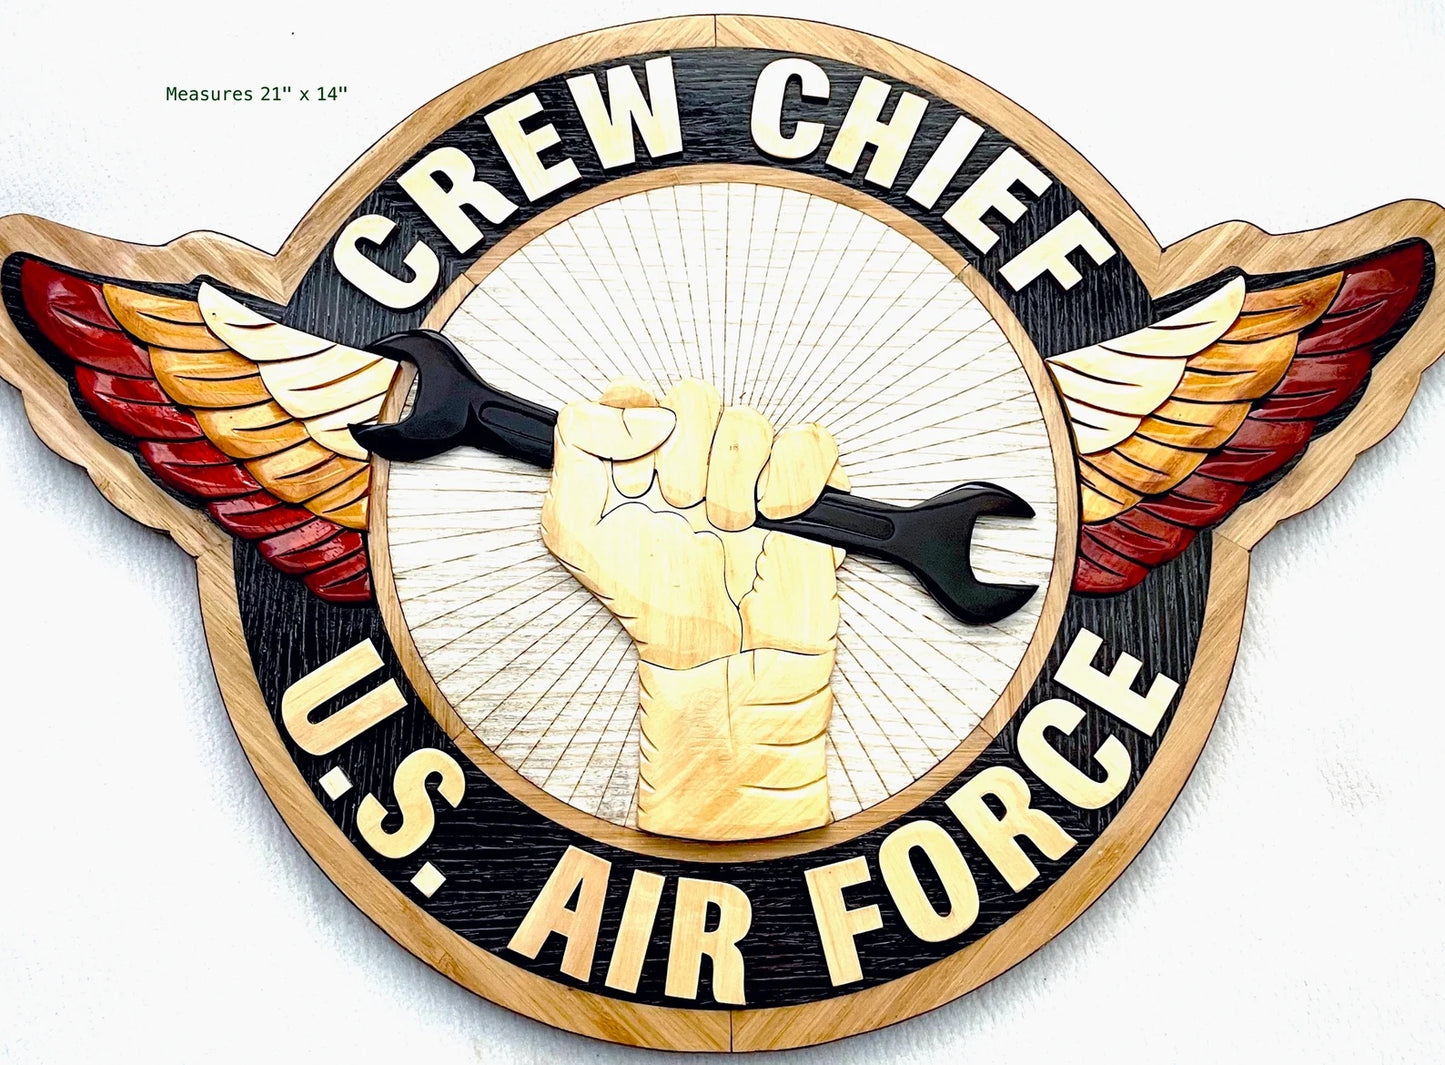 AIR FORCE CREW CHIEF Wood Art Plaque